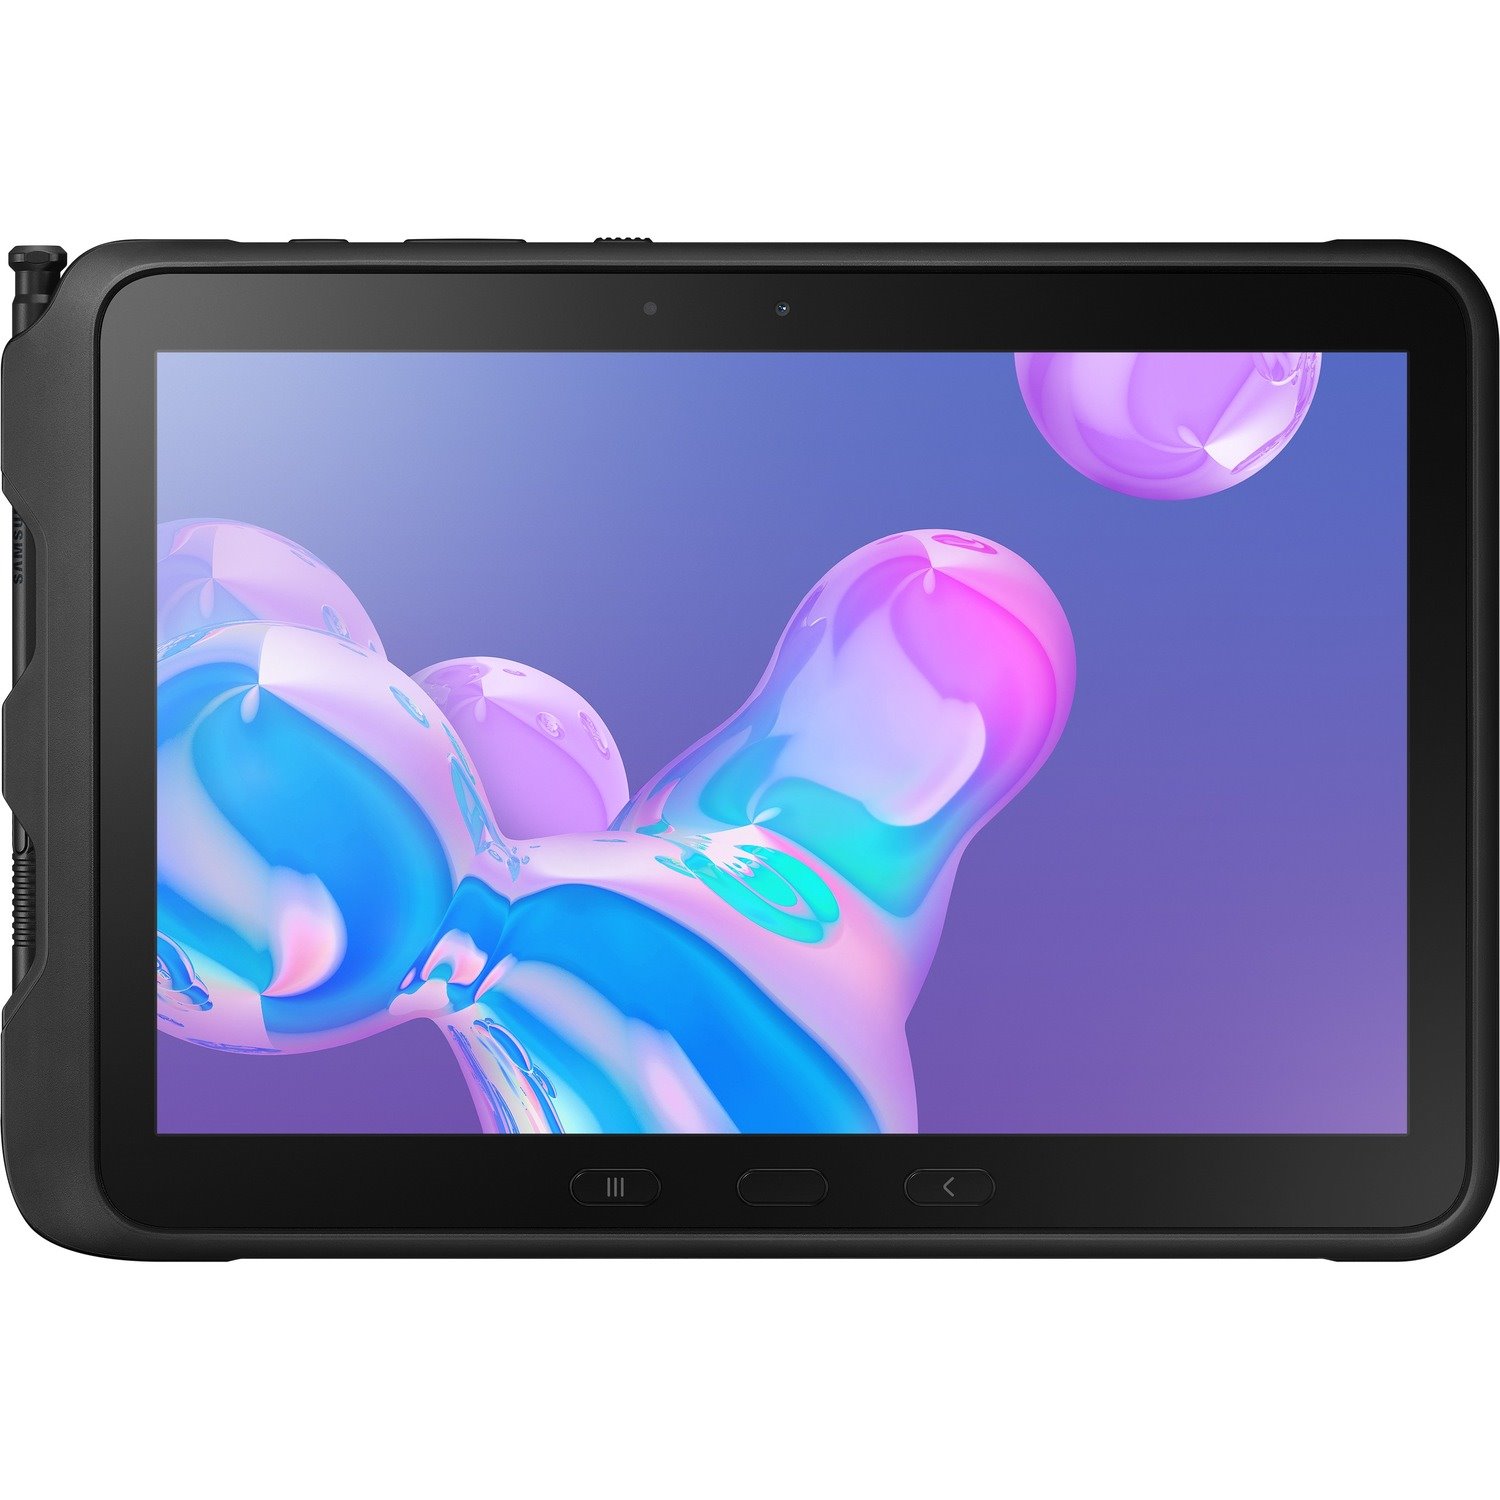 Samsung Galaxy Tab Active Pro SM-T540 Tablet - 25.7 cm (10.1") - Dual-core (2 Core) 2 GHz Hexa-core (6 Core) 1.70 GHz - 4 GB RAM - 64 GB Storage - Android 9.0 Pie